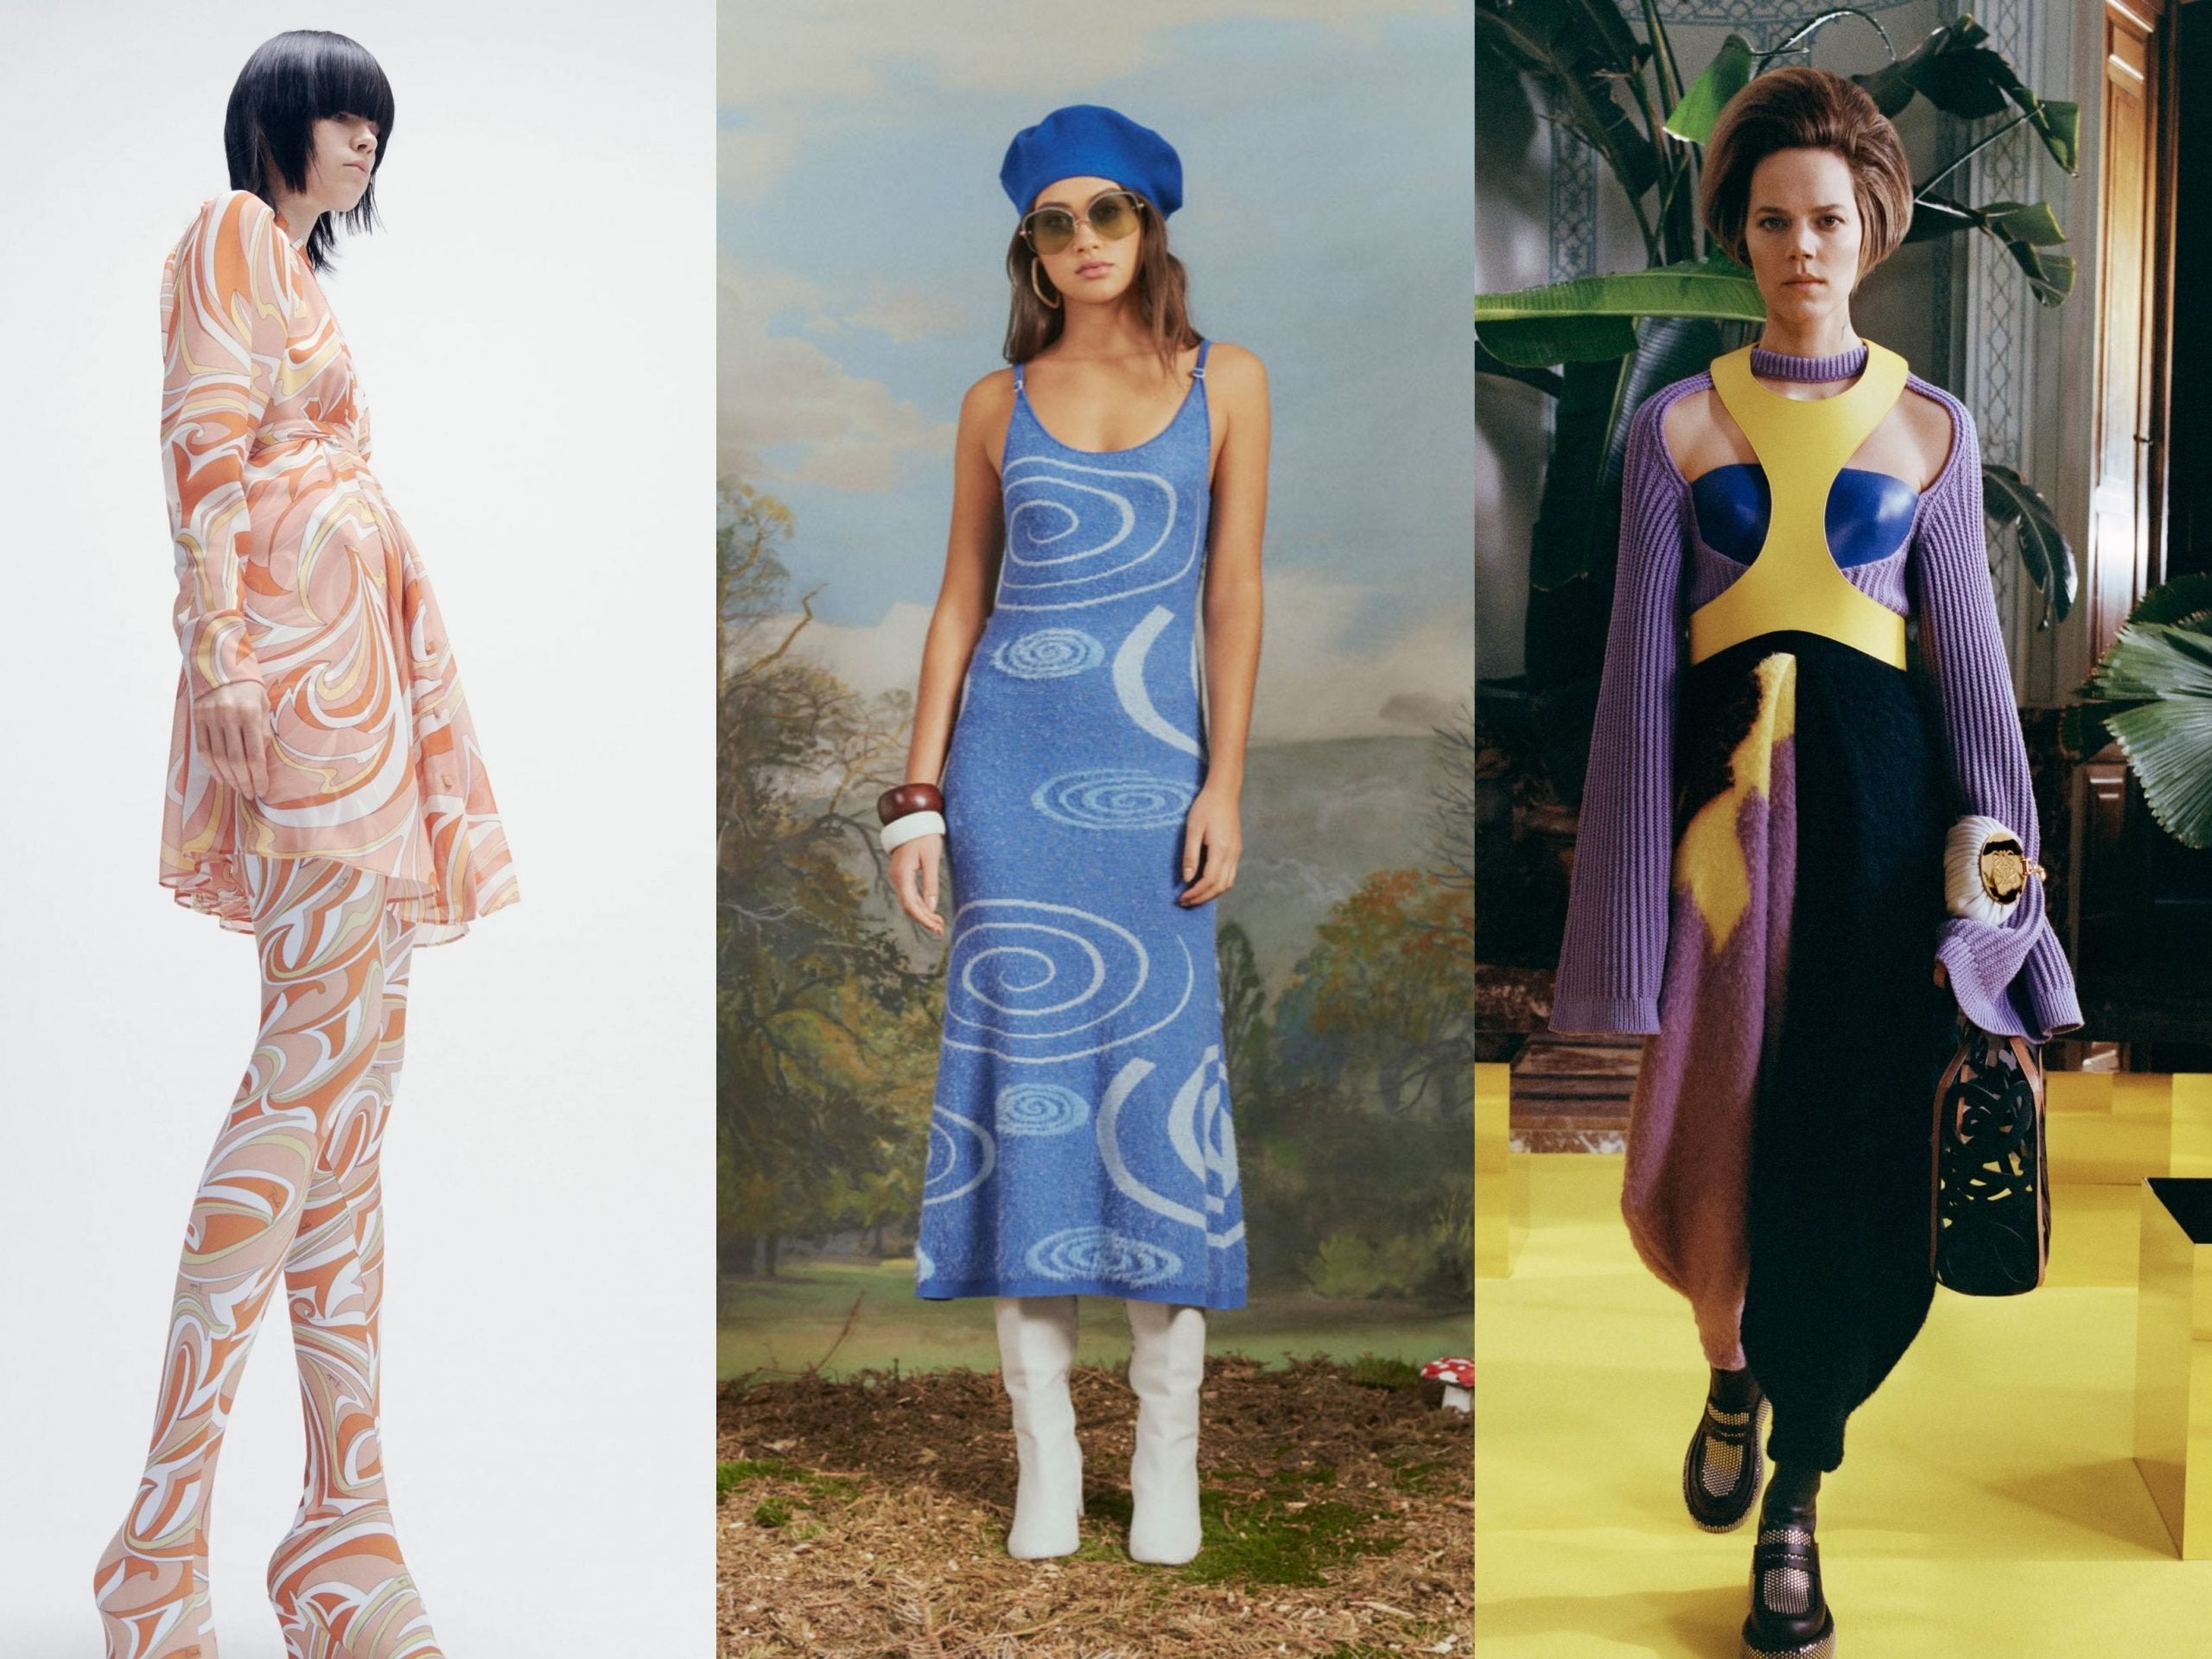 Models wearing AW21 trends abstract prints and sculpture